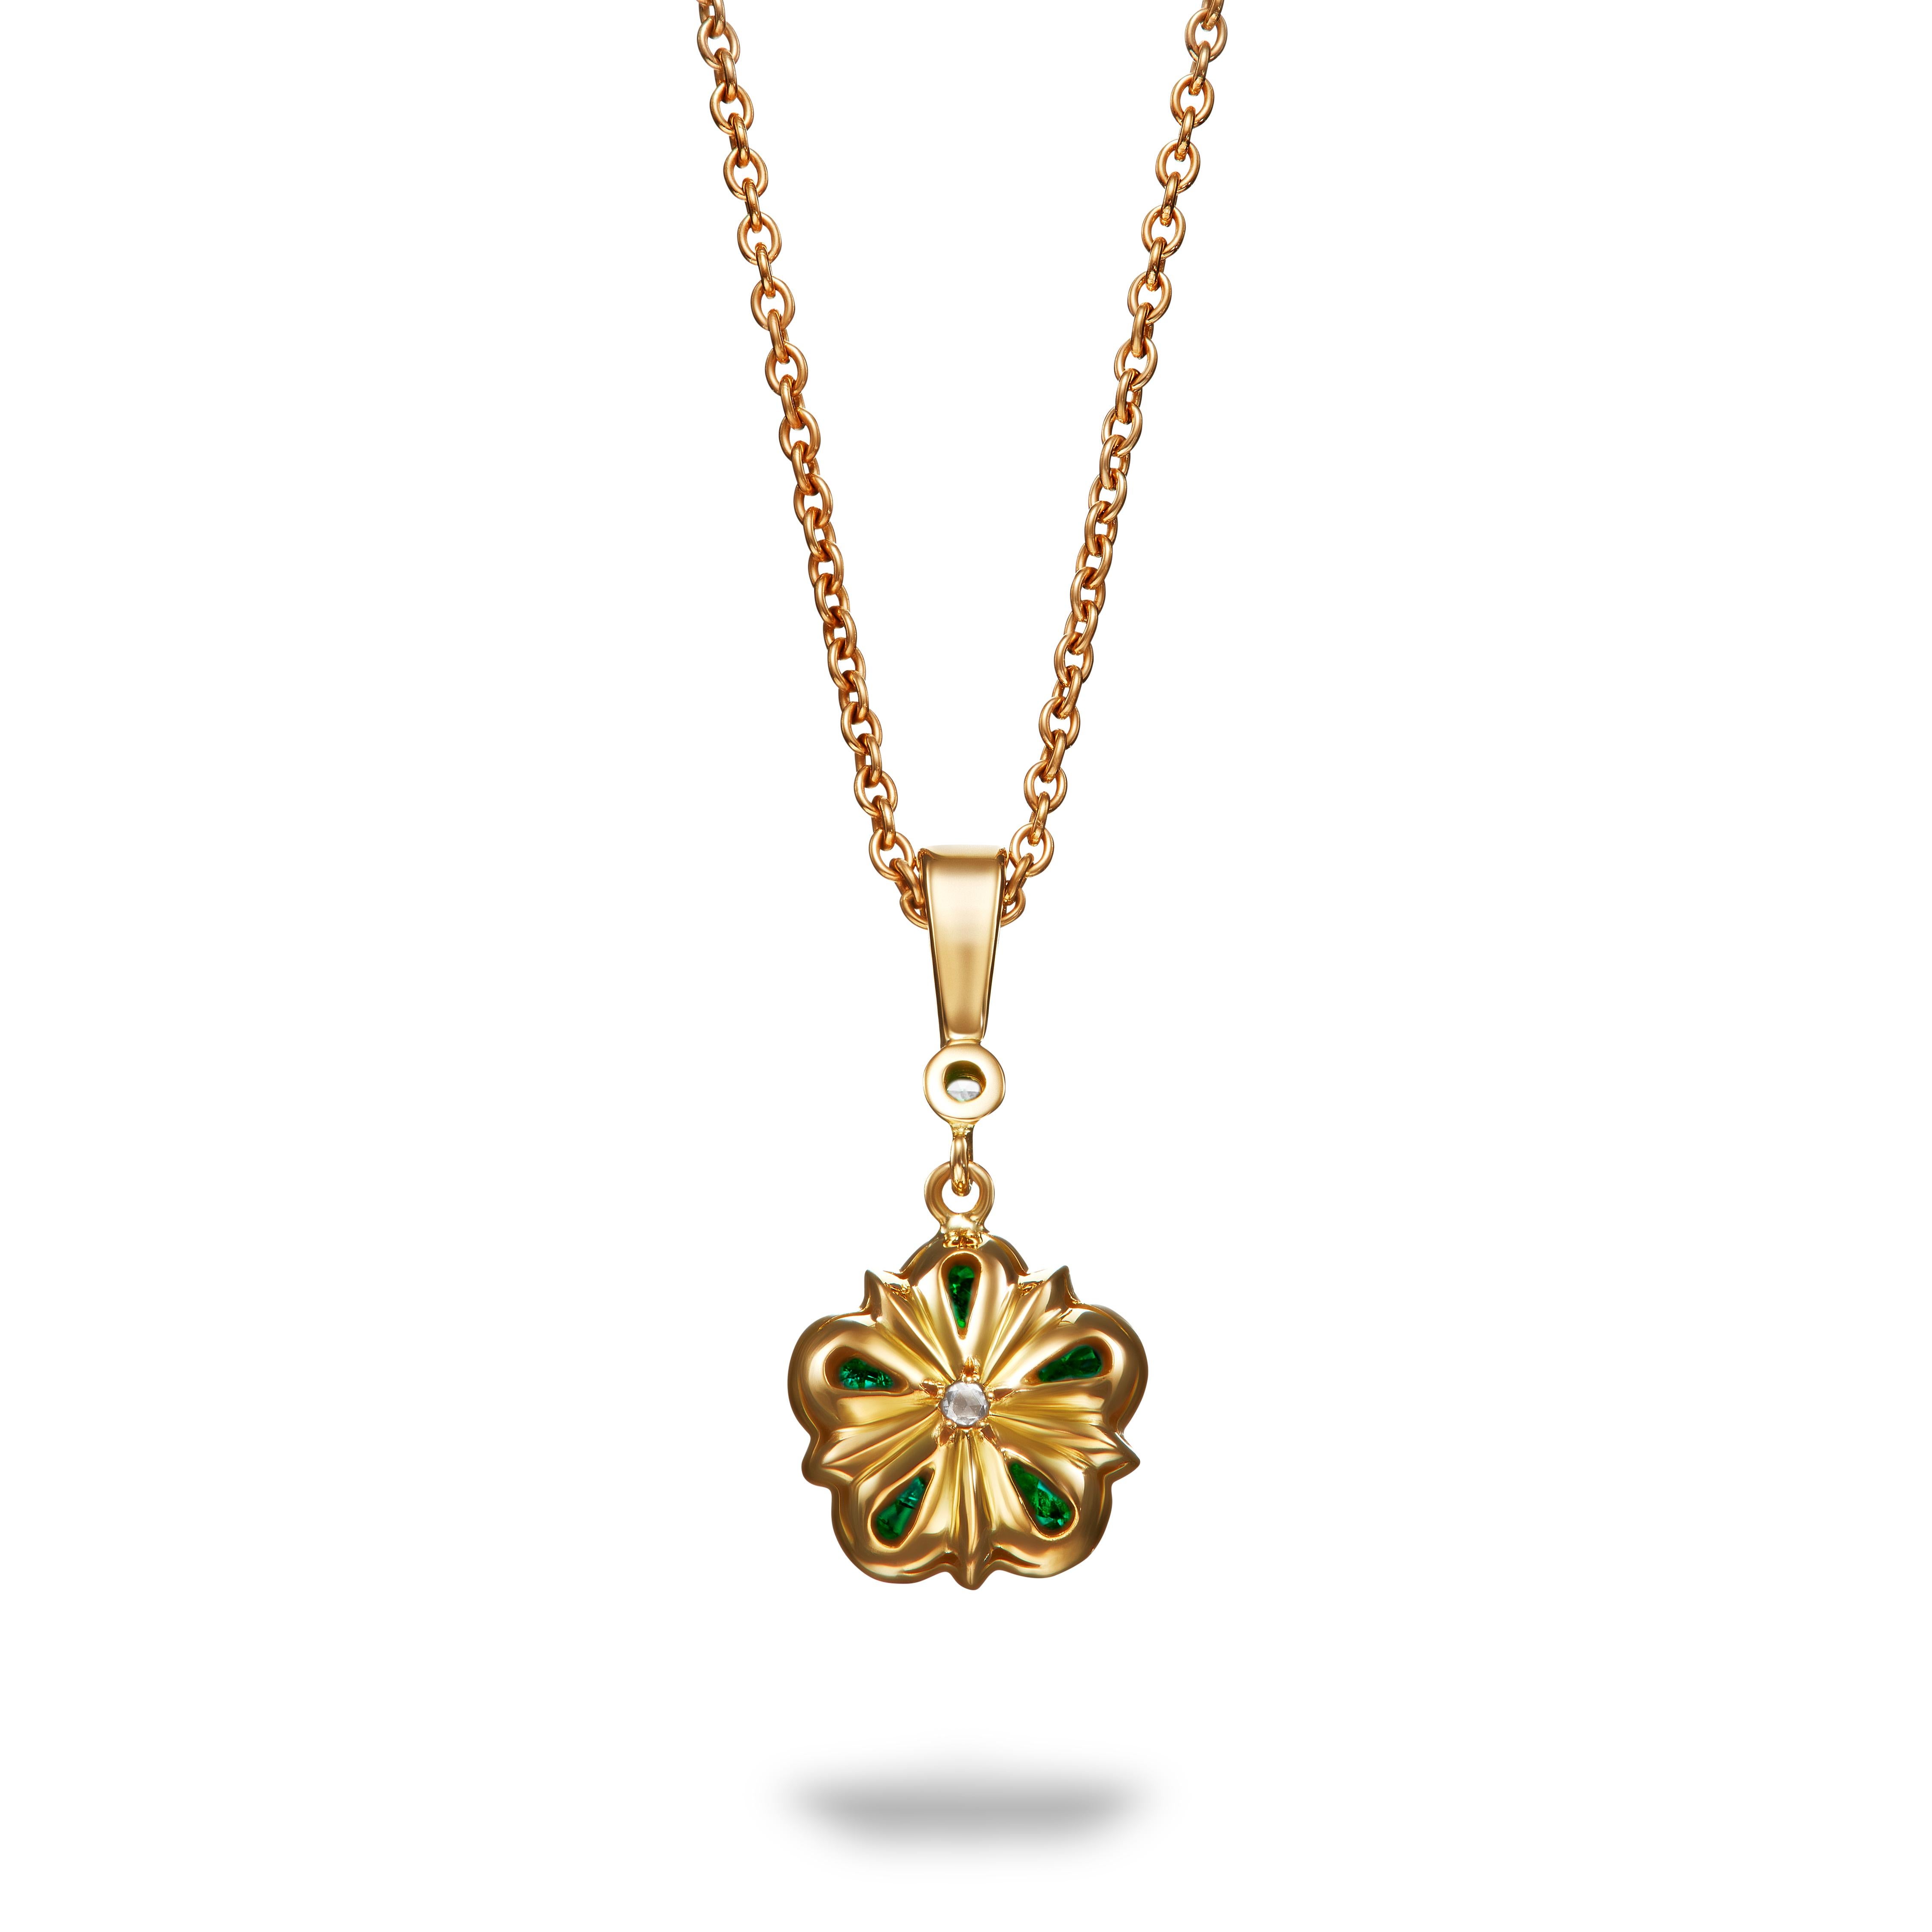 This unique emerald and rose cut diamond Rose pendant features vibrant emeralds surrounding a scintillating rose cut diamond. The pendant is suspended from an 18k yellow gold bail with another lovely matching rose cut diamond. In true Aril Jewels